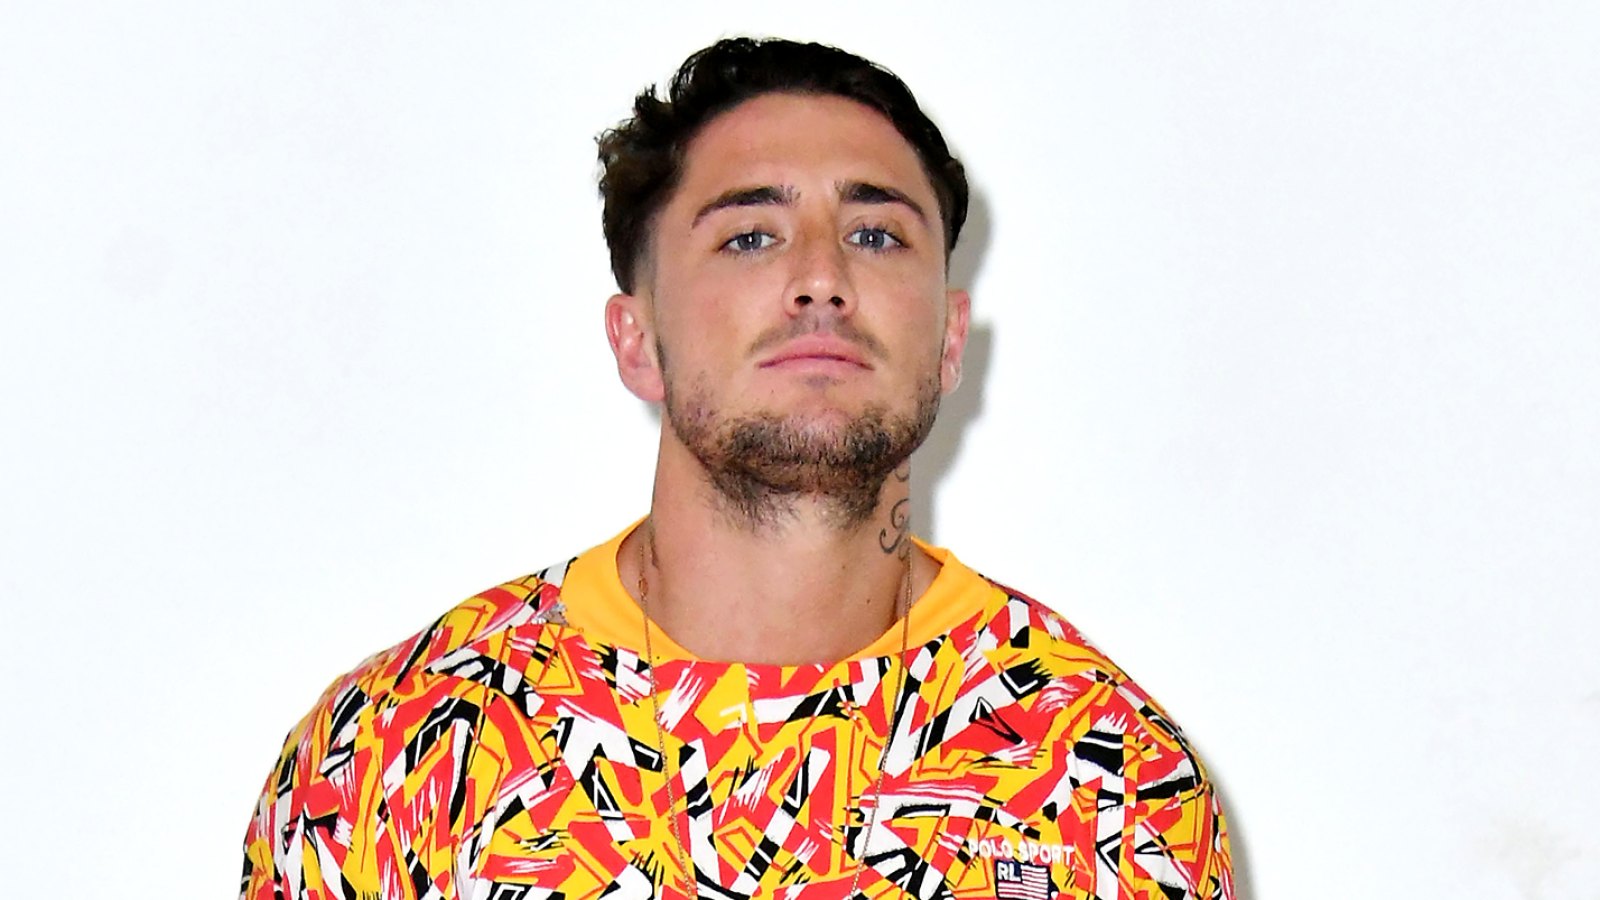 Stephen Bear Releases Statement Responding to Revenge Porn Accusations